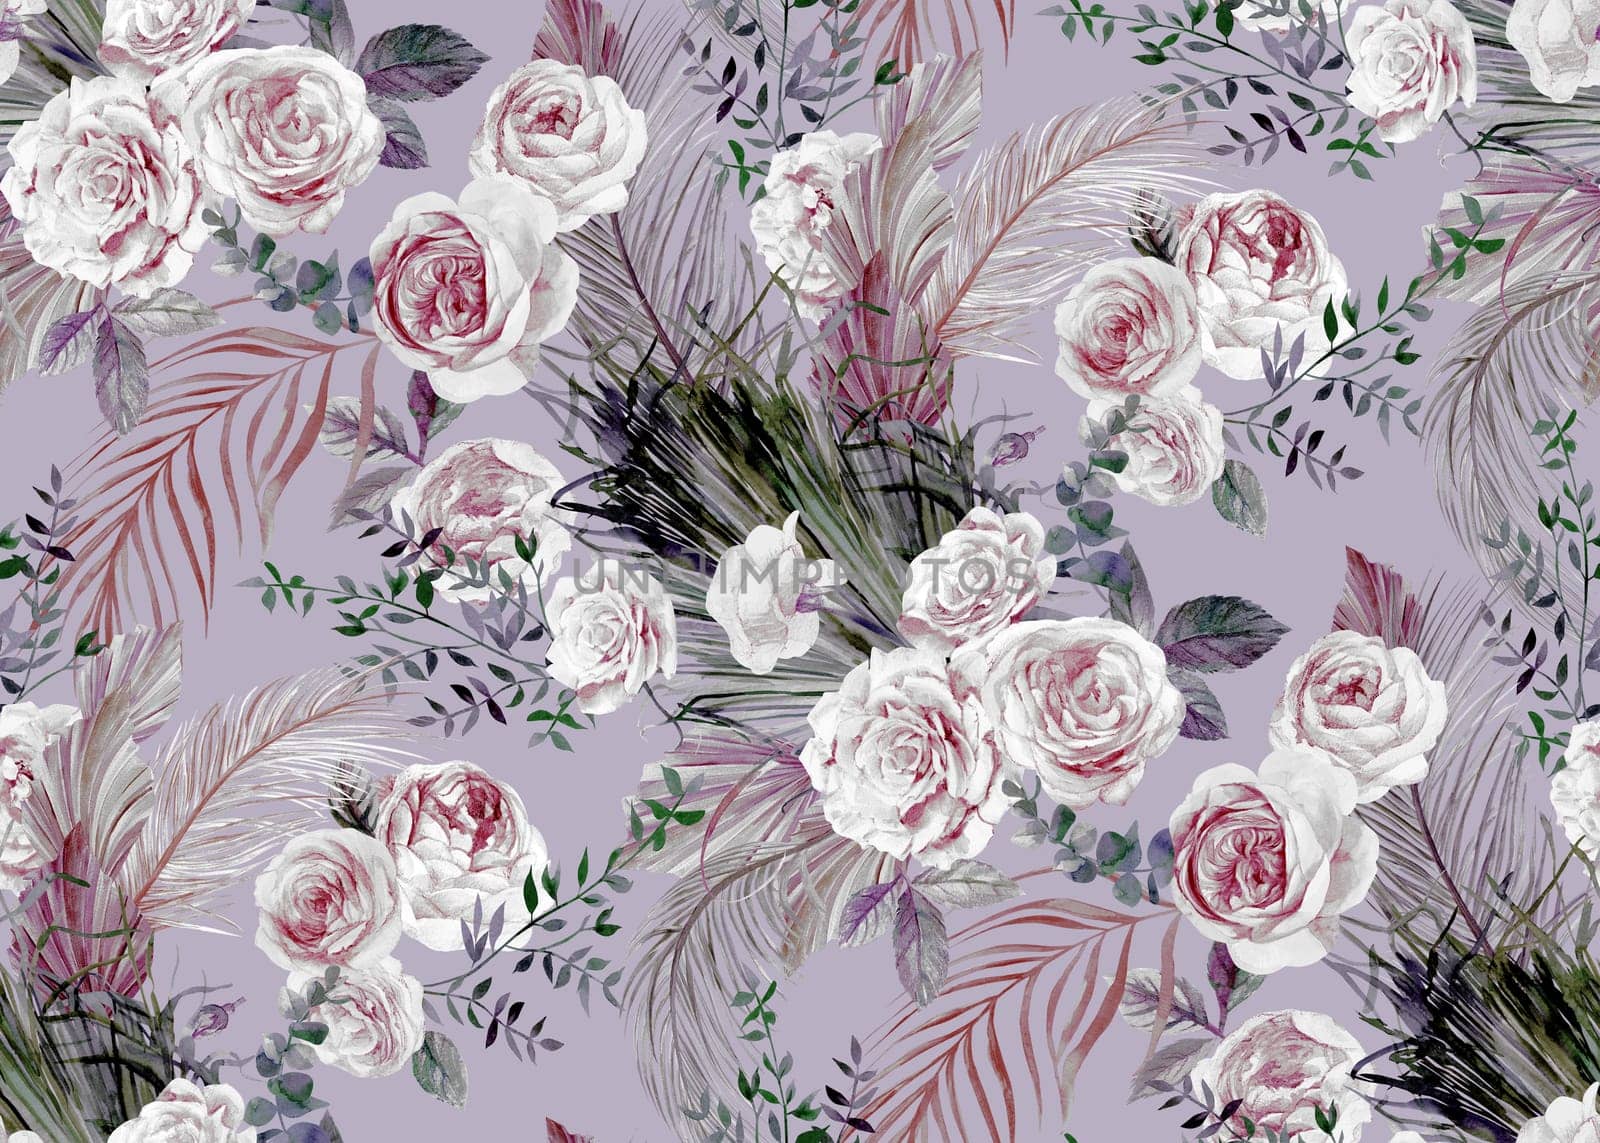 Seamles purple pattern with cute roses and tropical leaves of palm for textile